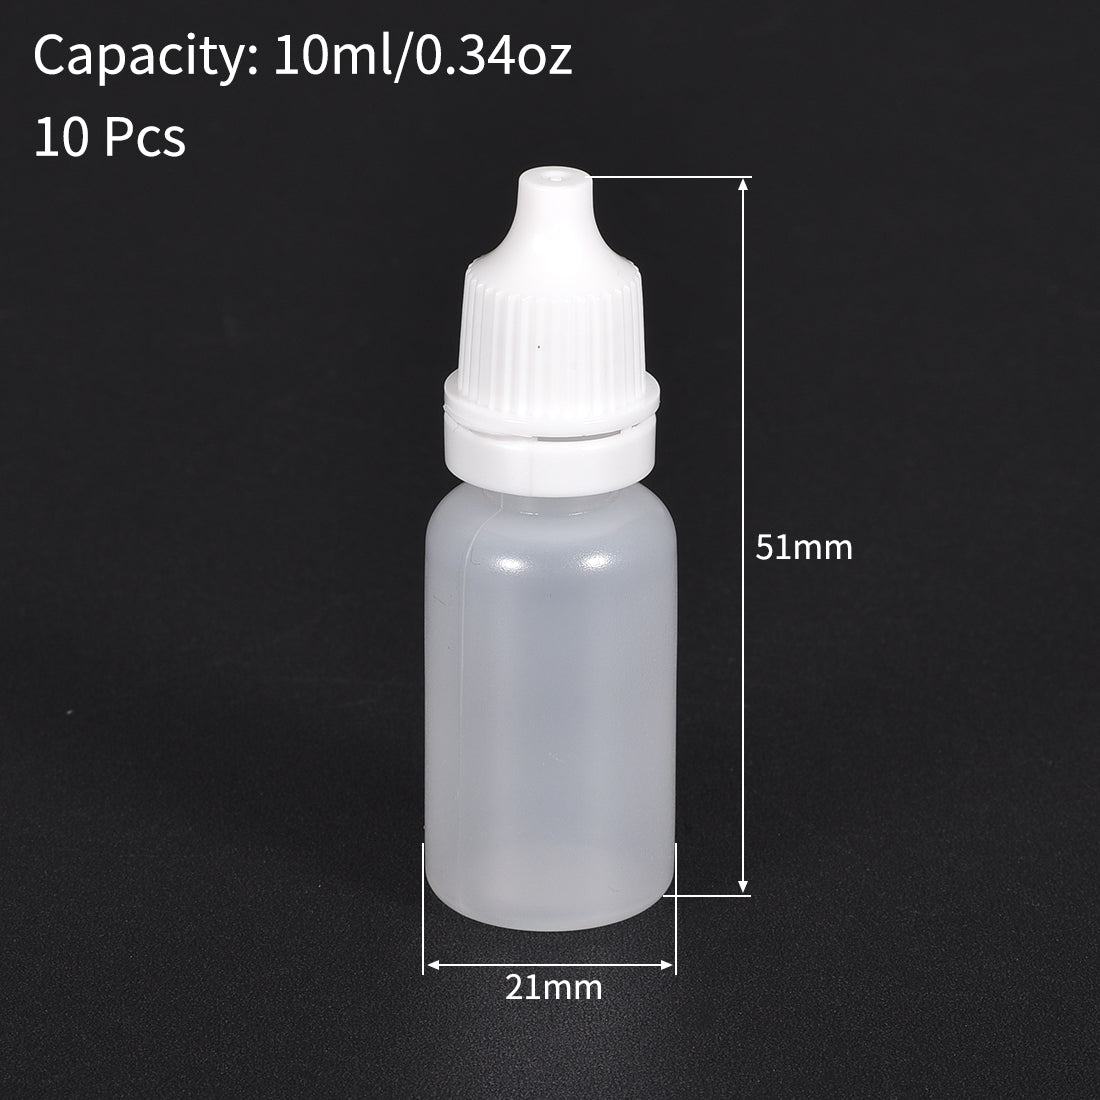 uxcell Uxcell 10ml/0.34 oz Empty Squeezable Dropper Bottle White 10pcs